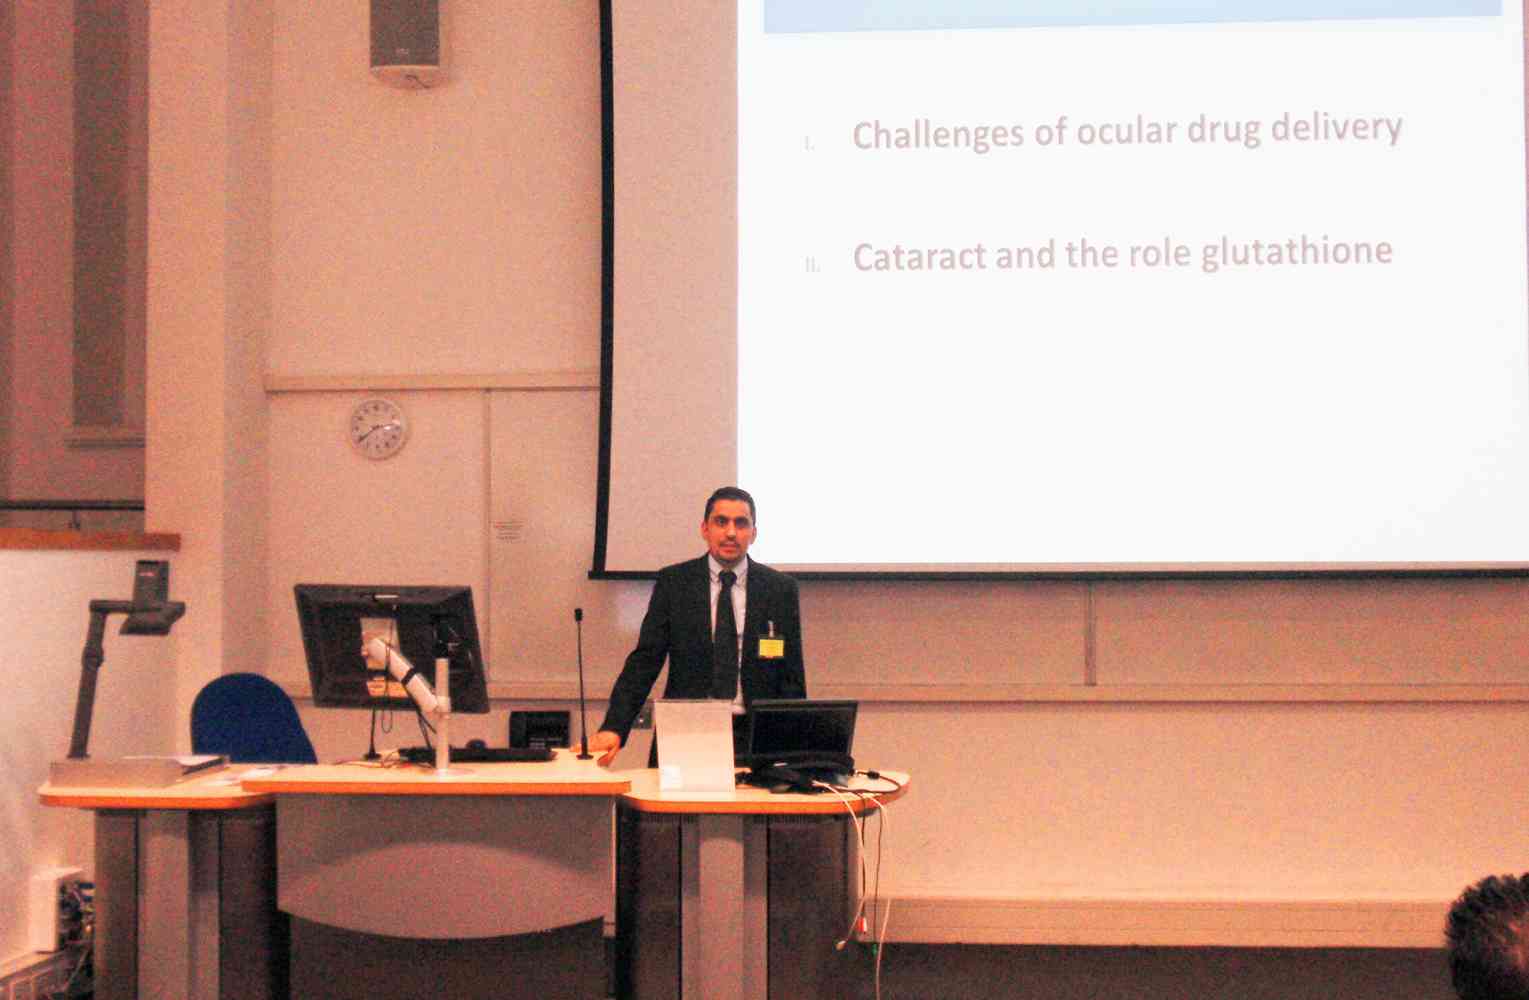 Dr Al-Kinani presenting his talk regarding delivery of antioxidants to the eye for cataract prophylaxis - The American Association of Pharmaceutical Scientists (AAPS) UK chapter